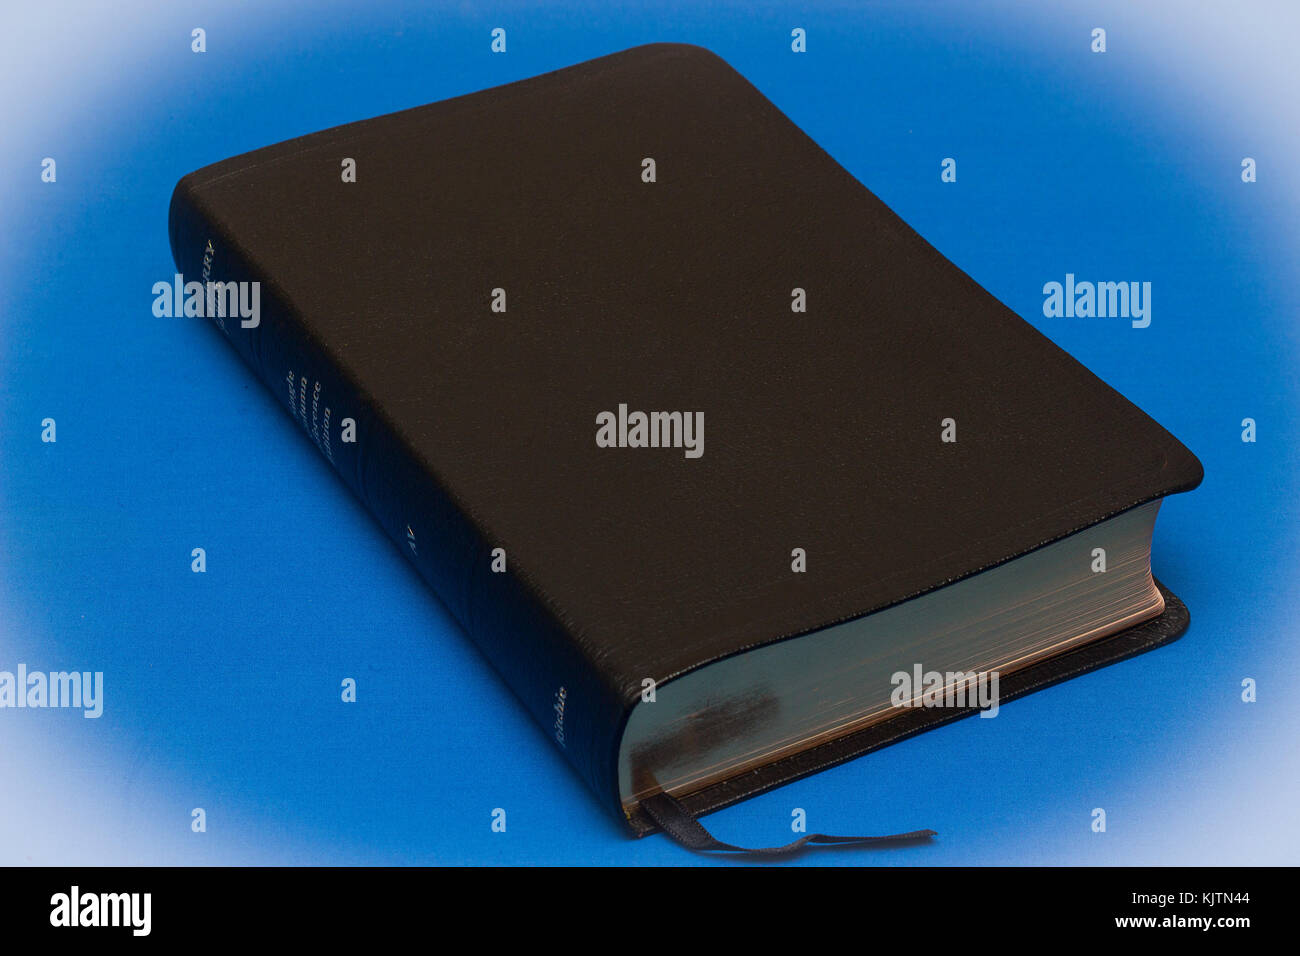 An leather bound bible containing the Word of God on a blue background Stock Photo